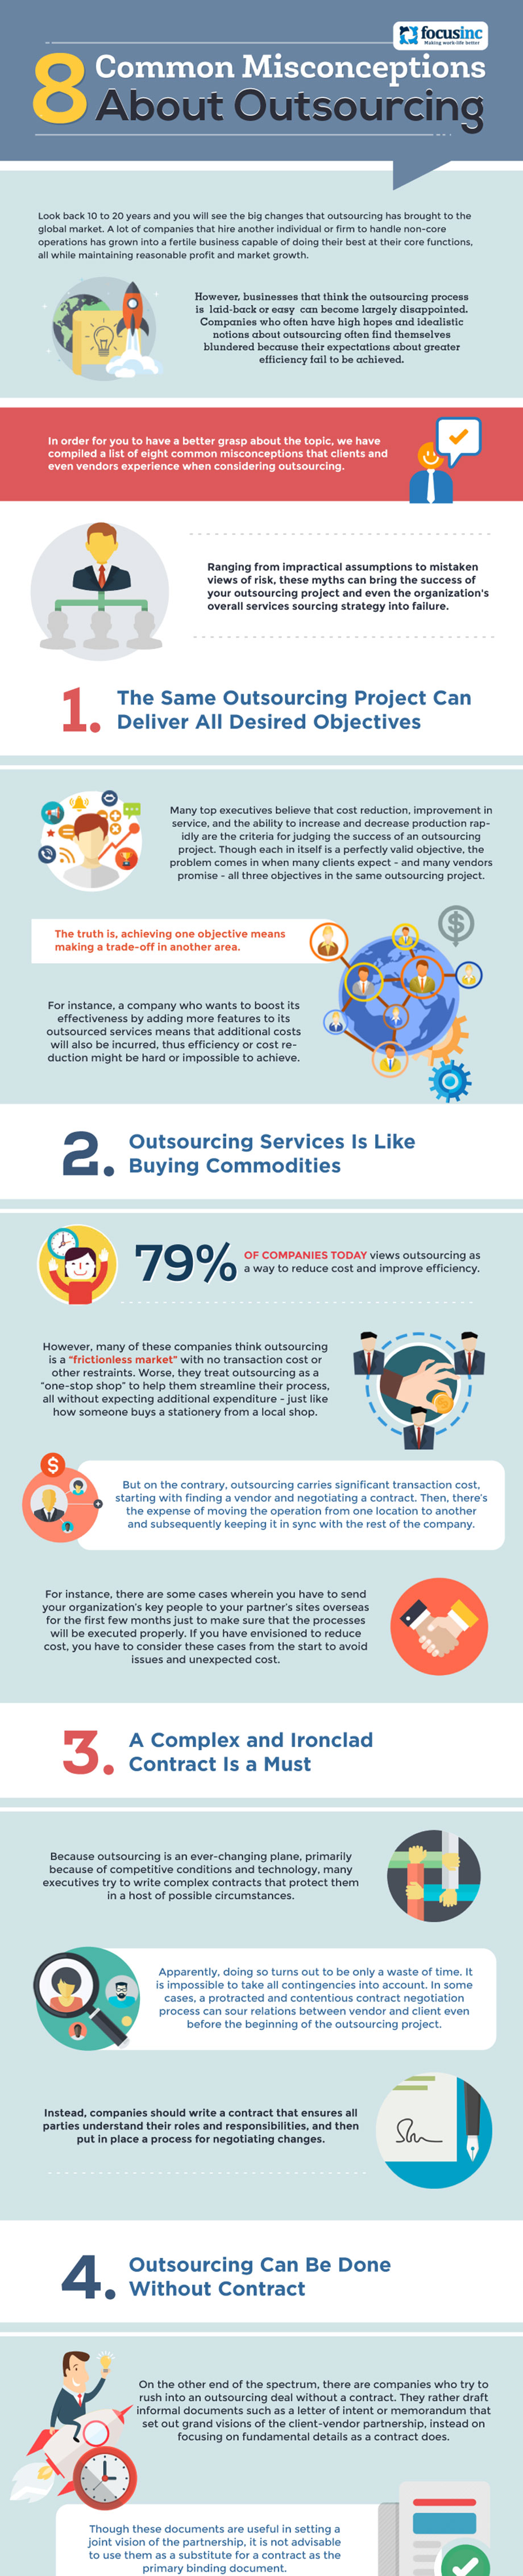 8-common-misconceptions-about-outsourcing-hd-1